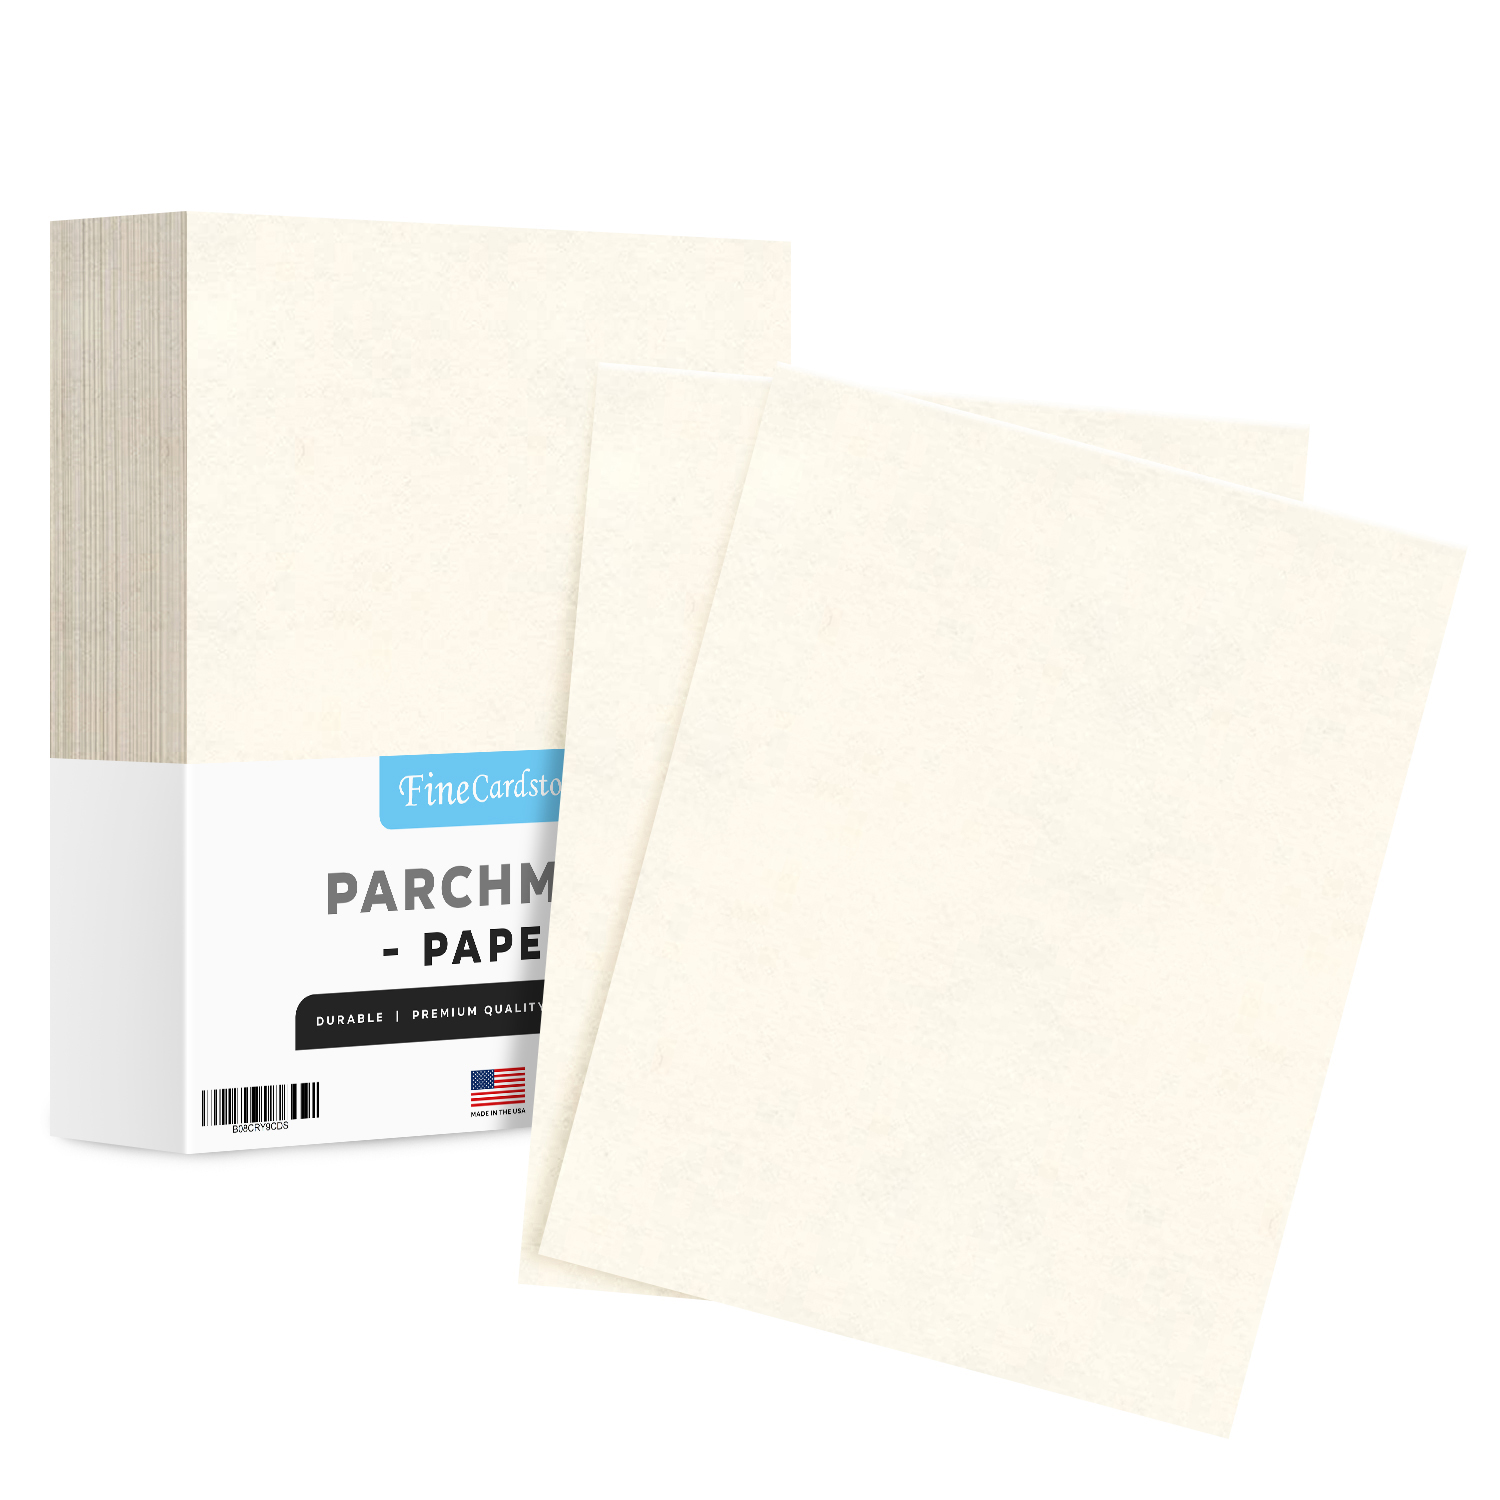 New White Parchment Paper – Great for Certificates, Menus and Wedding  Invitations | 24lb Bond, 60lb Text (90gsm) | 8.5 x 11” | 1 Ream – 500  Sheets per